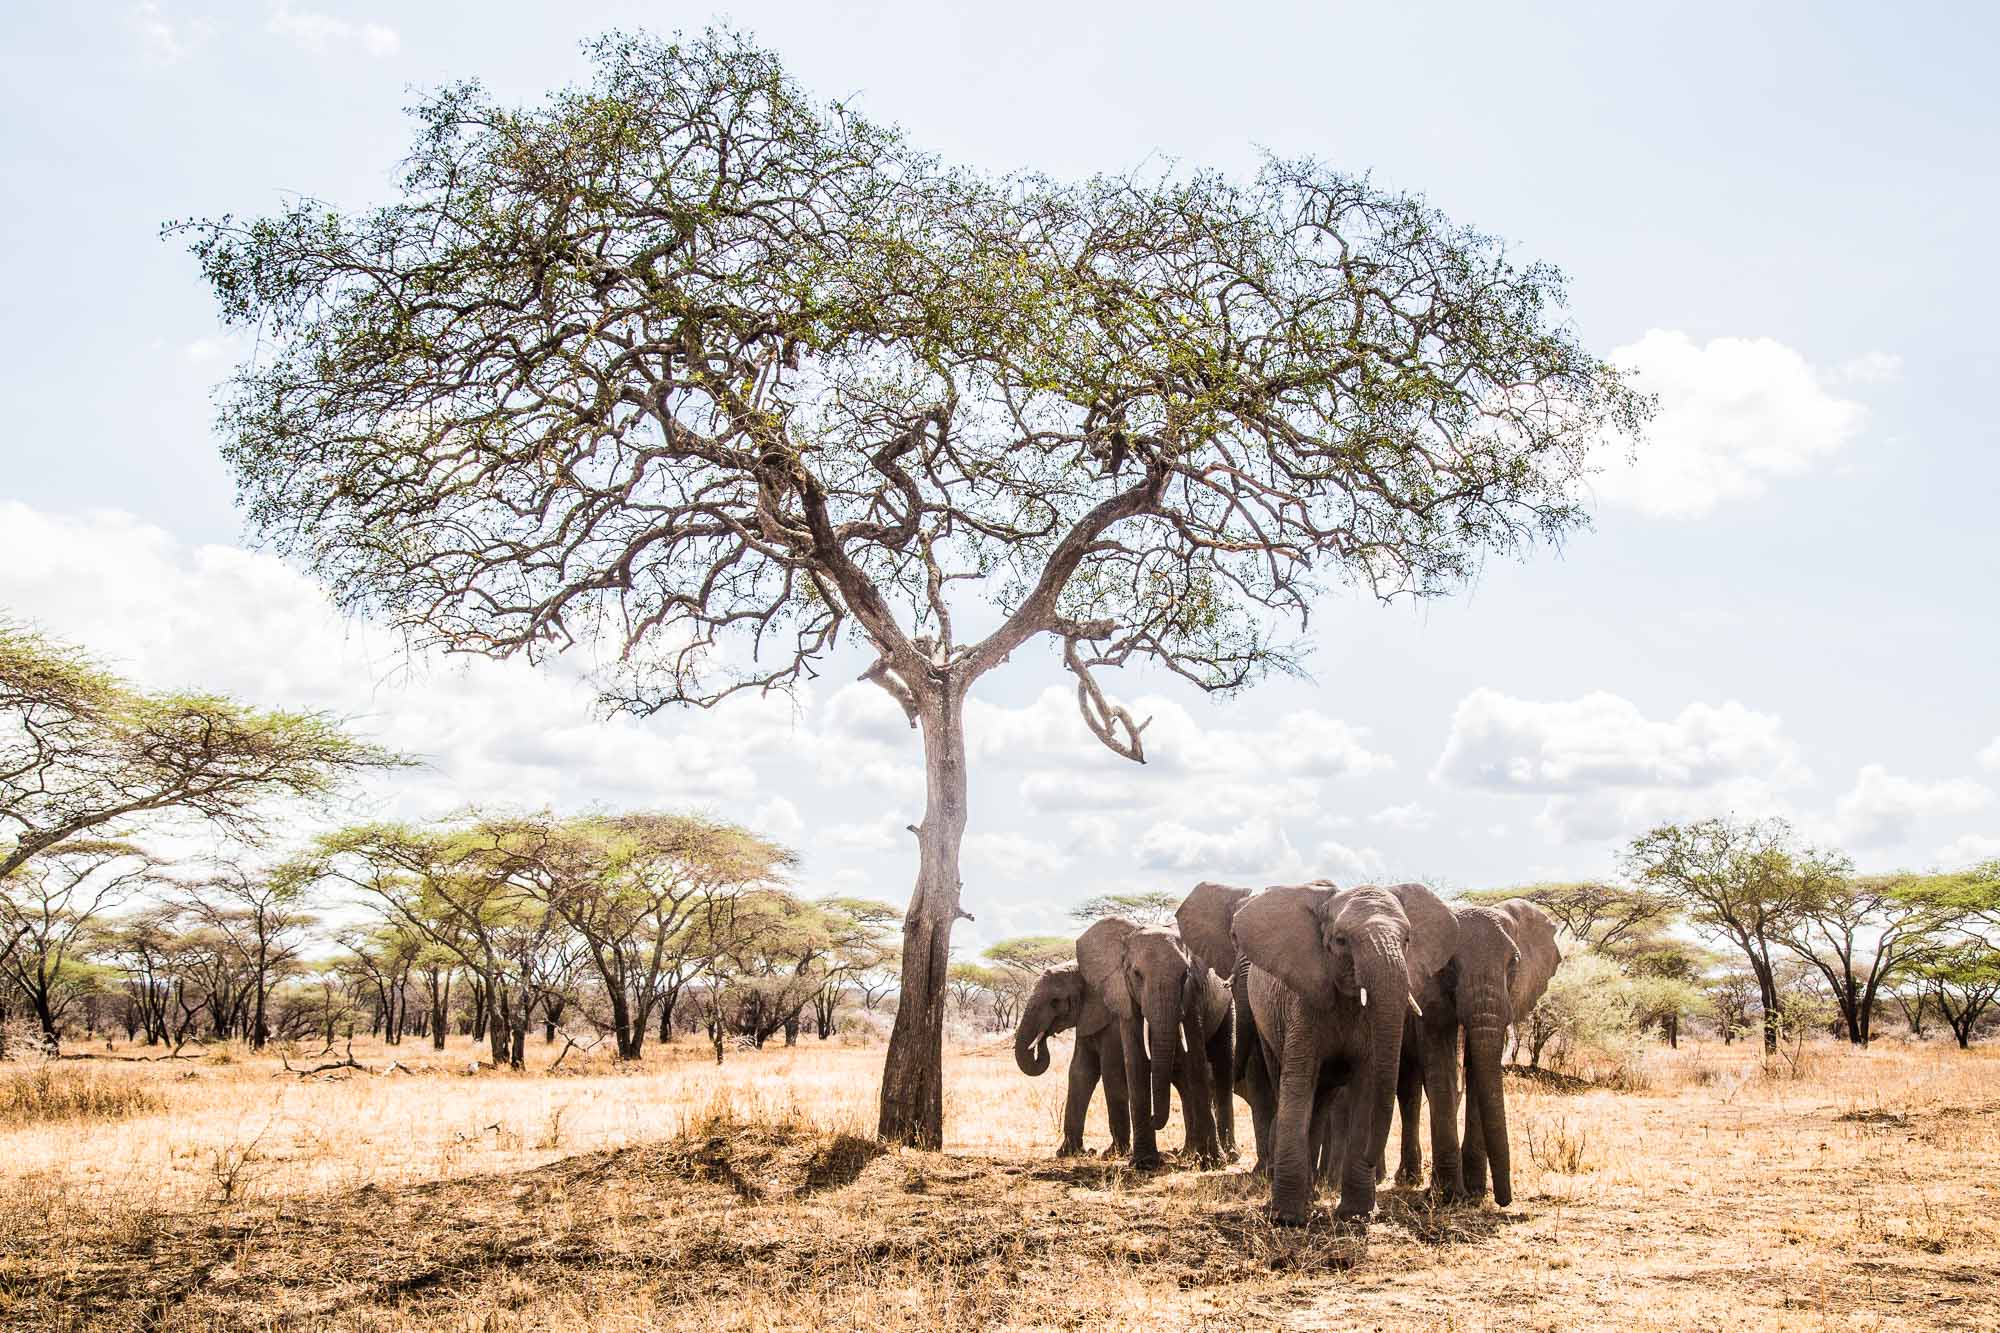 small herd of elephants gathered under an acacia tree